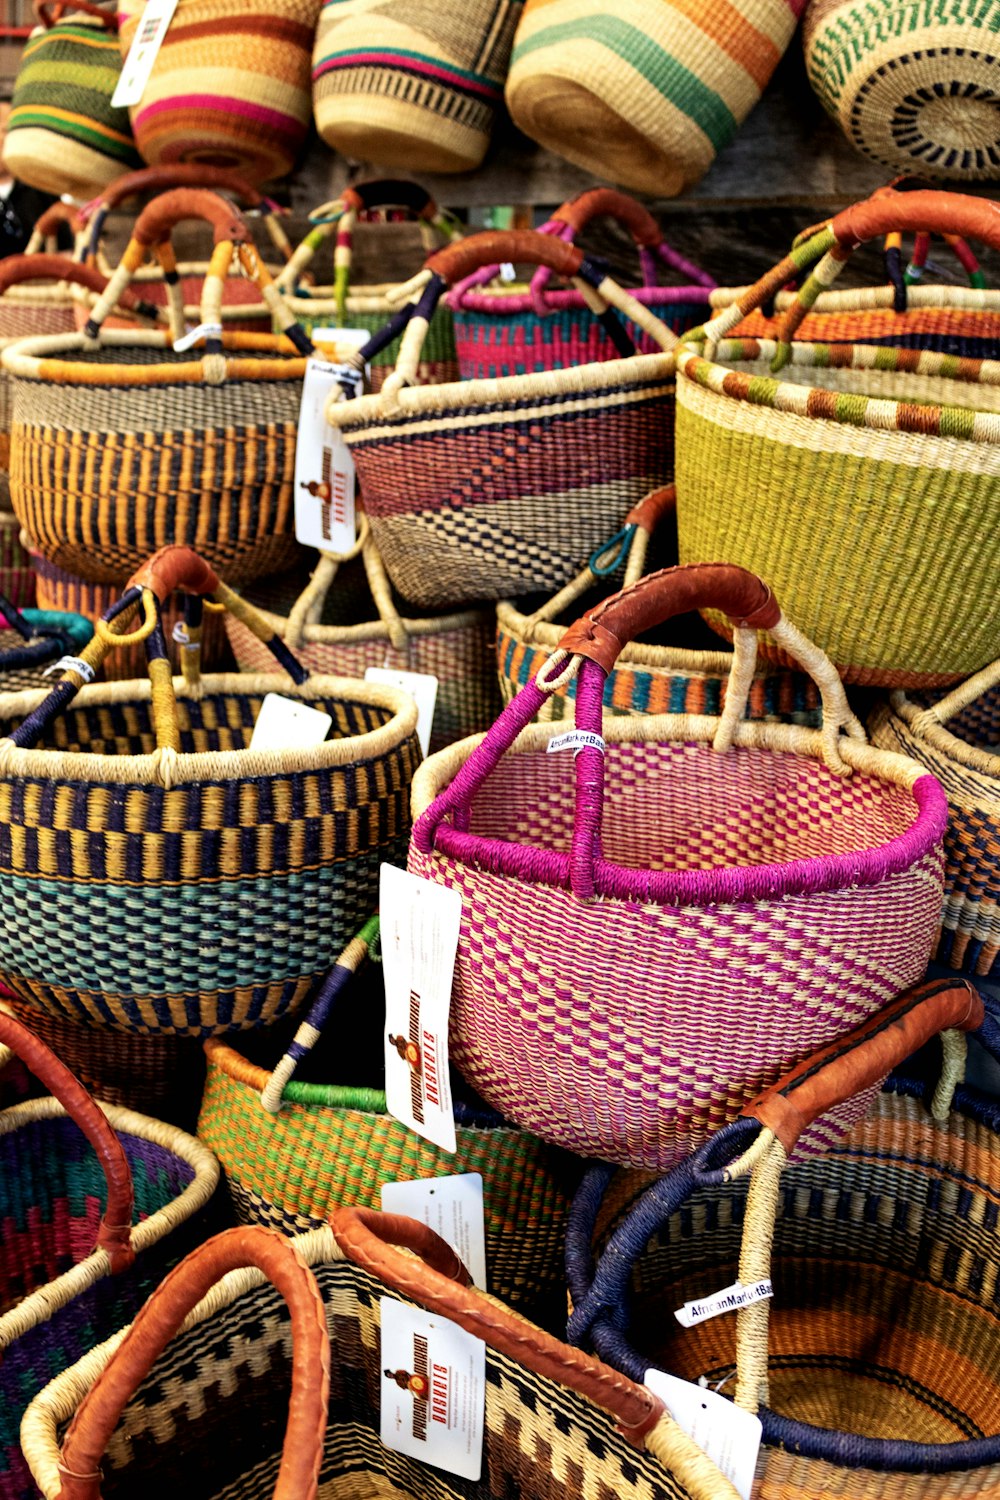 baskets for sale at a market with price tags